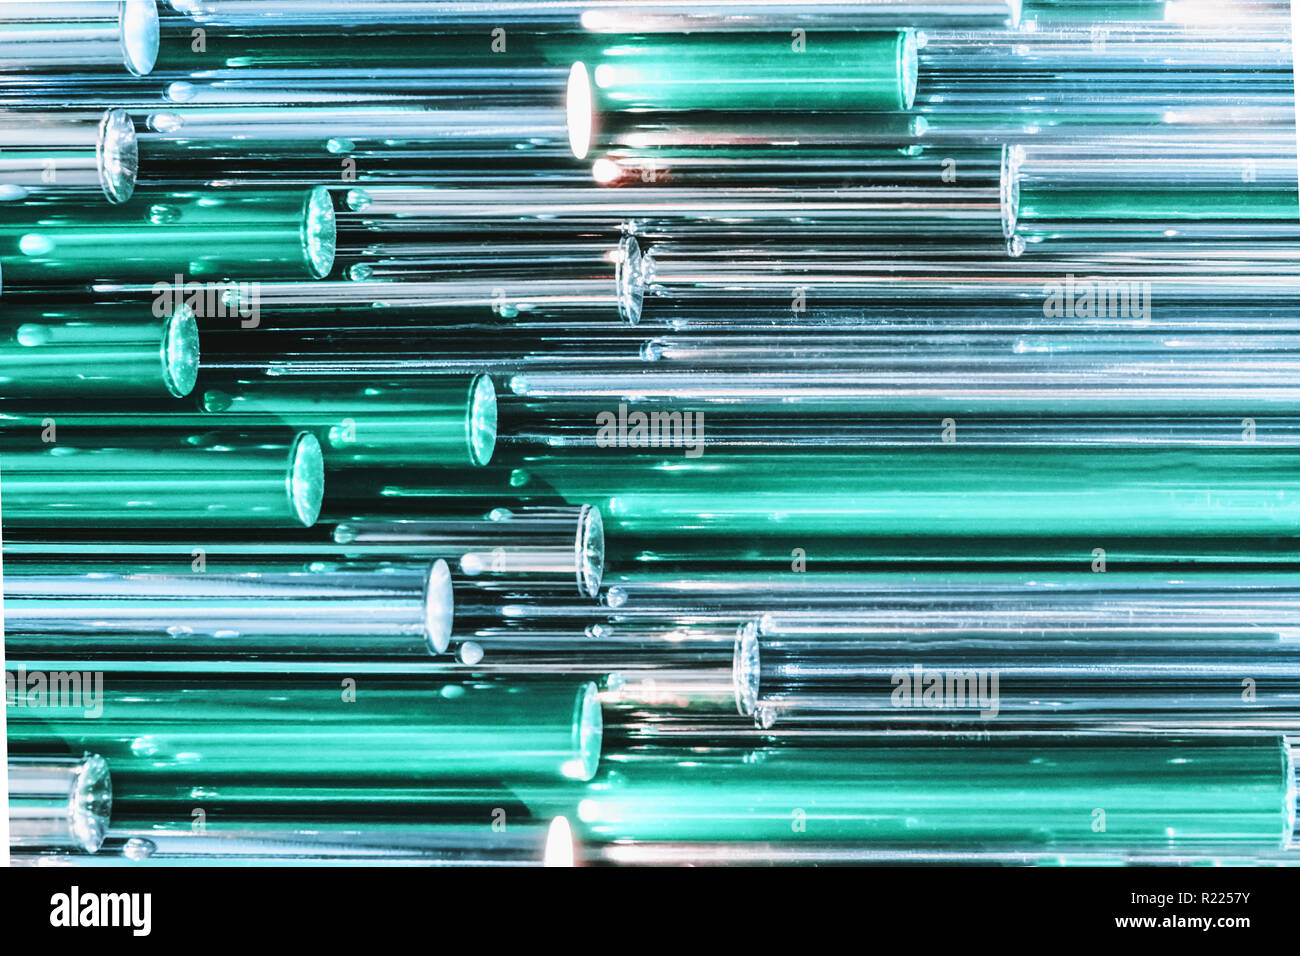 Colorful teal holographic metallic tube as texture. Iridescent wallpaper. Metal surface, trendy design. Abstract background. Stock Photo